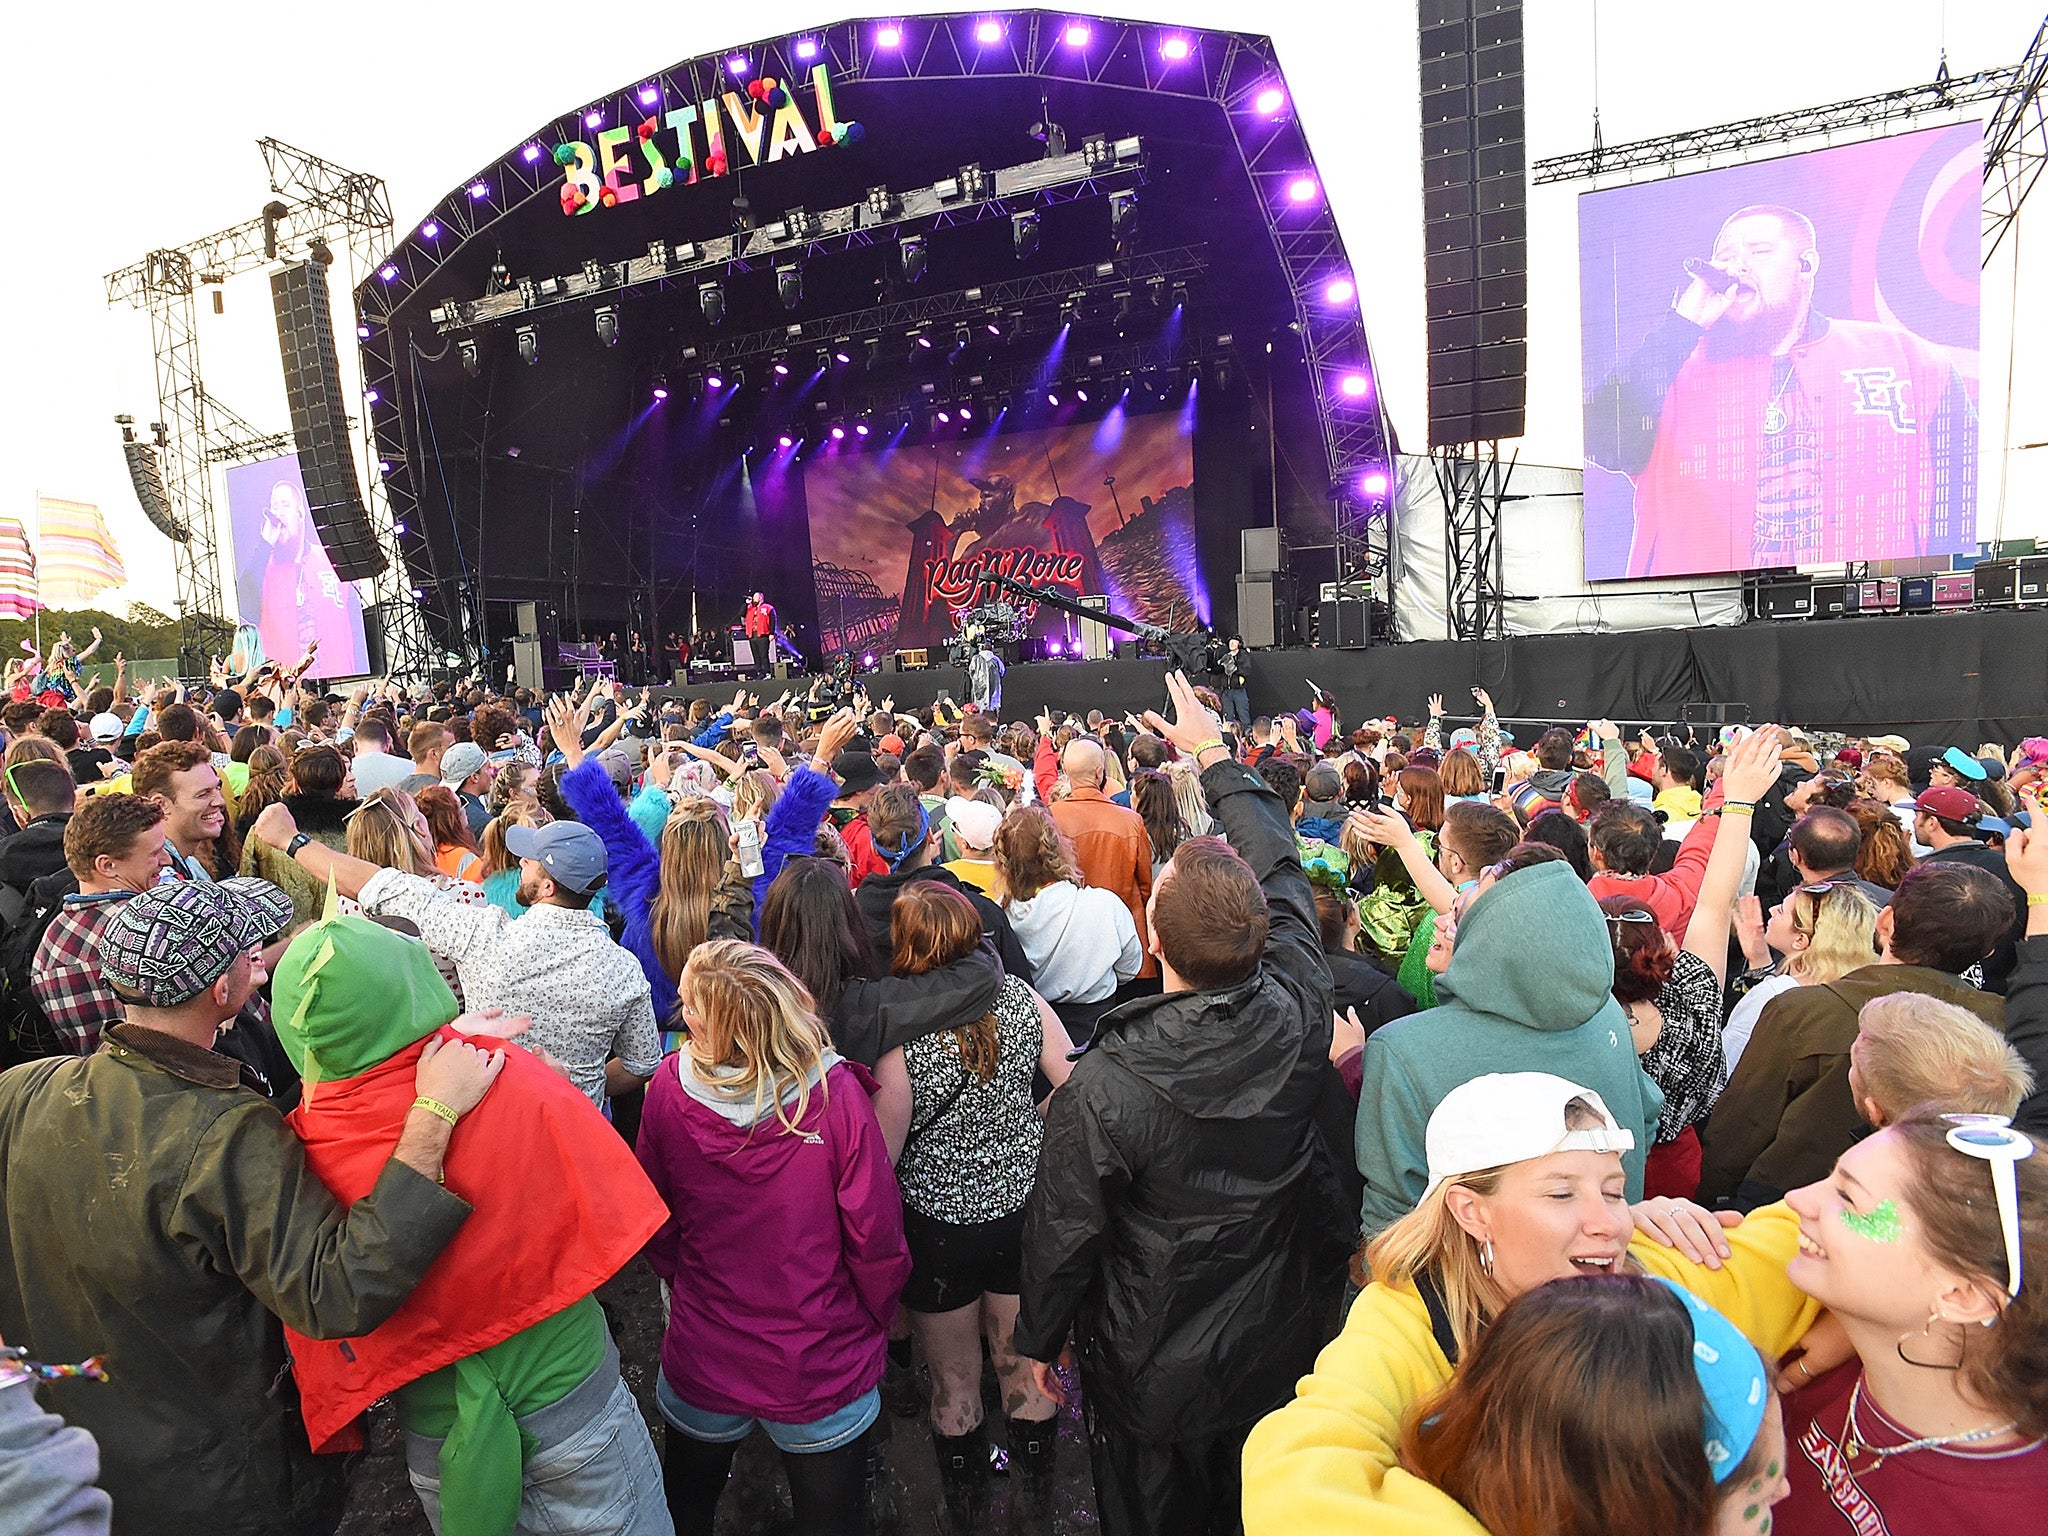 Bestival will offer drug testing facilities at the festival in 2018 after a drug-related death last year